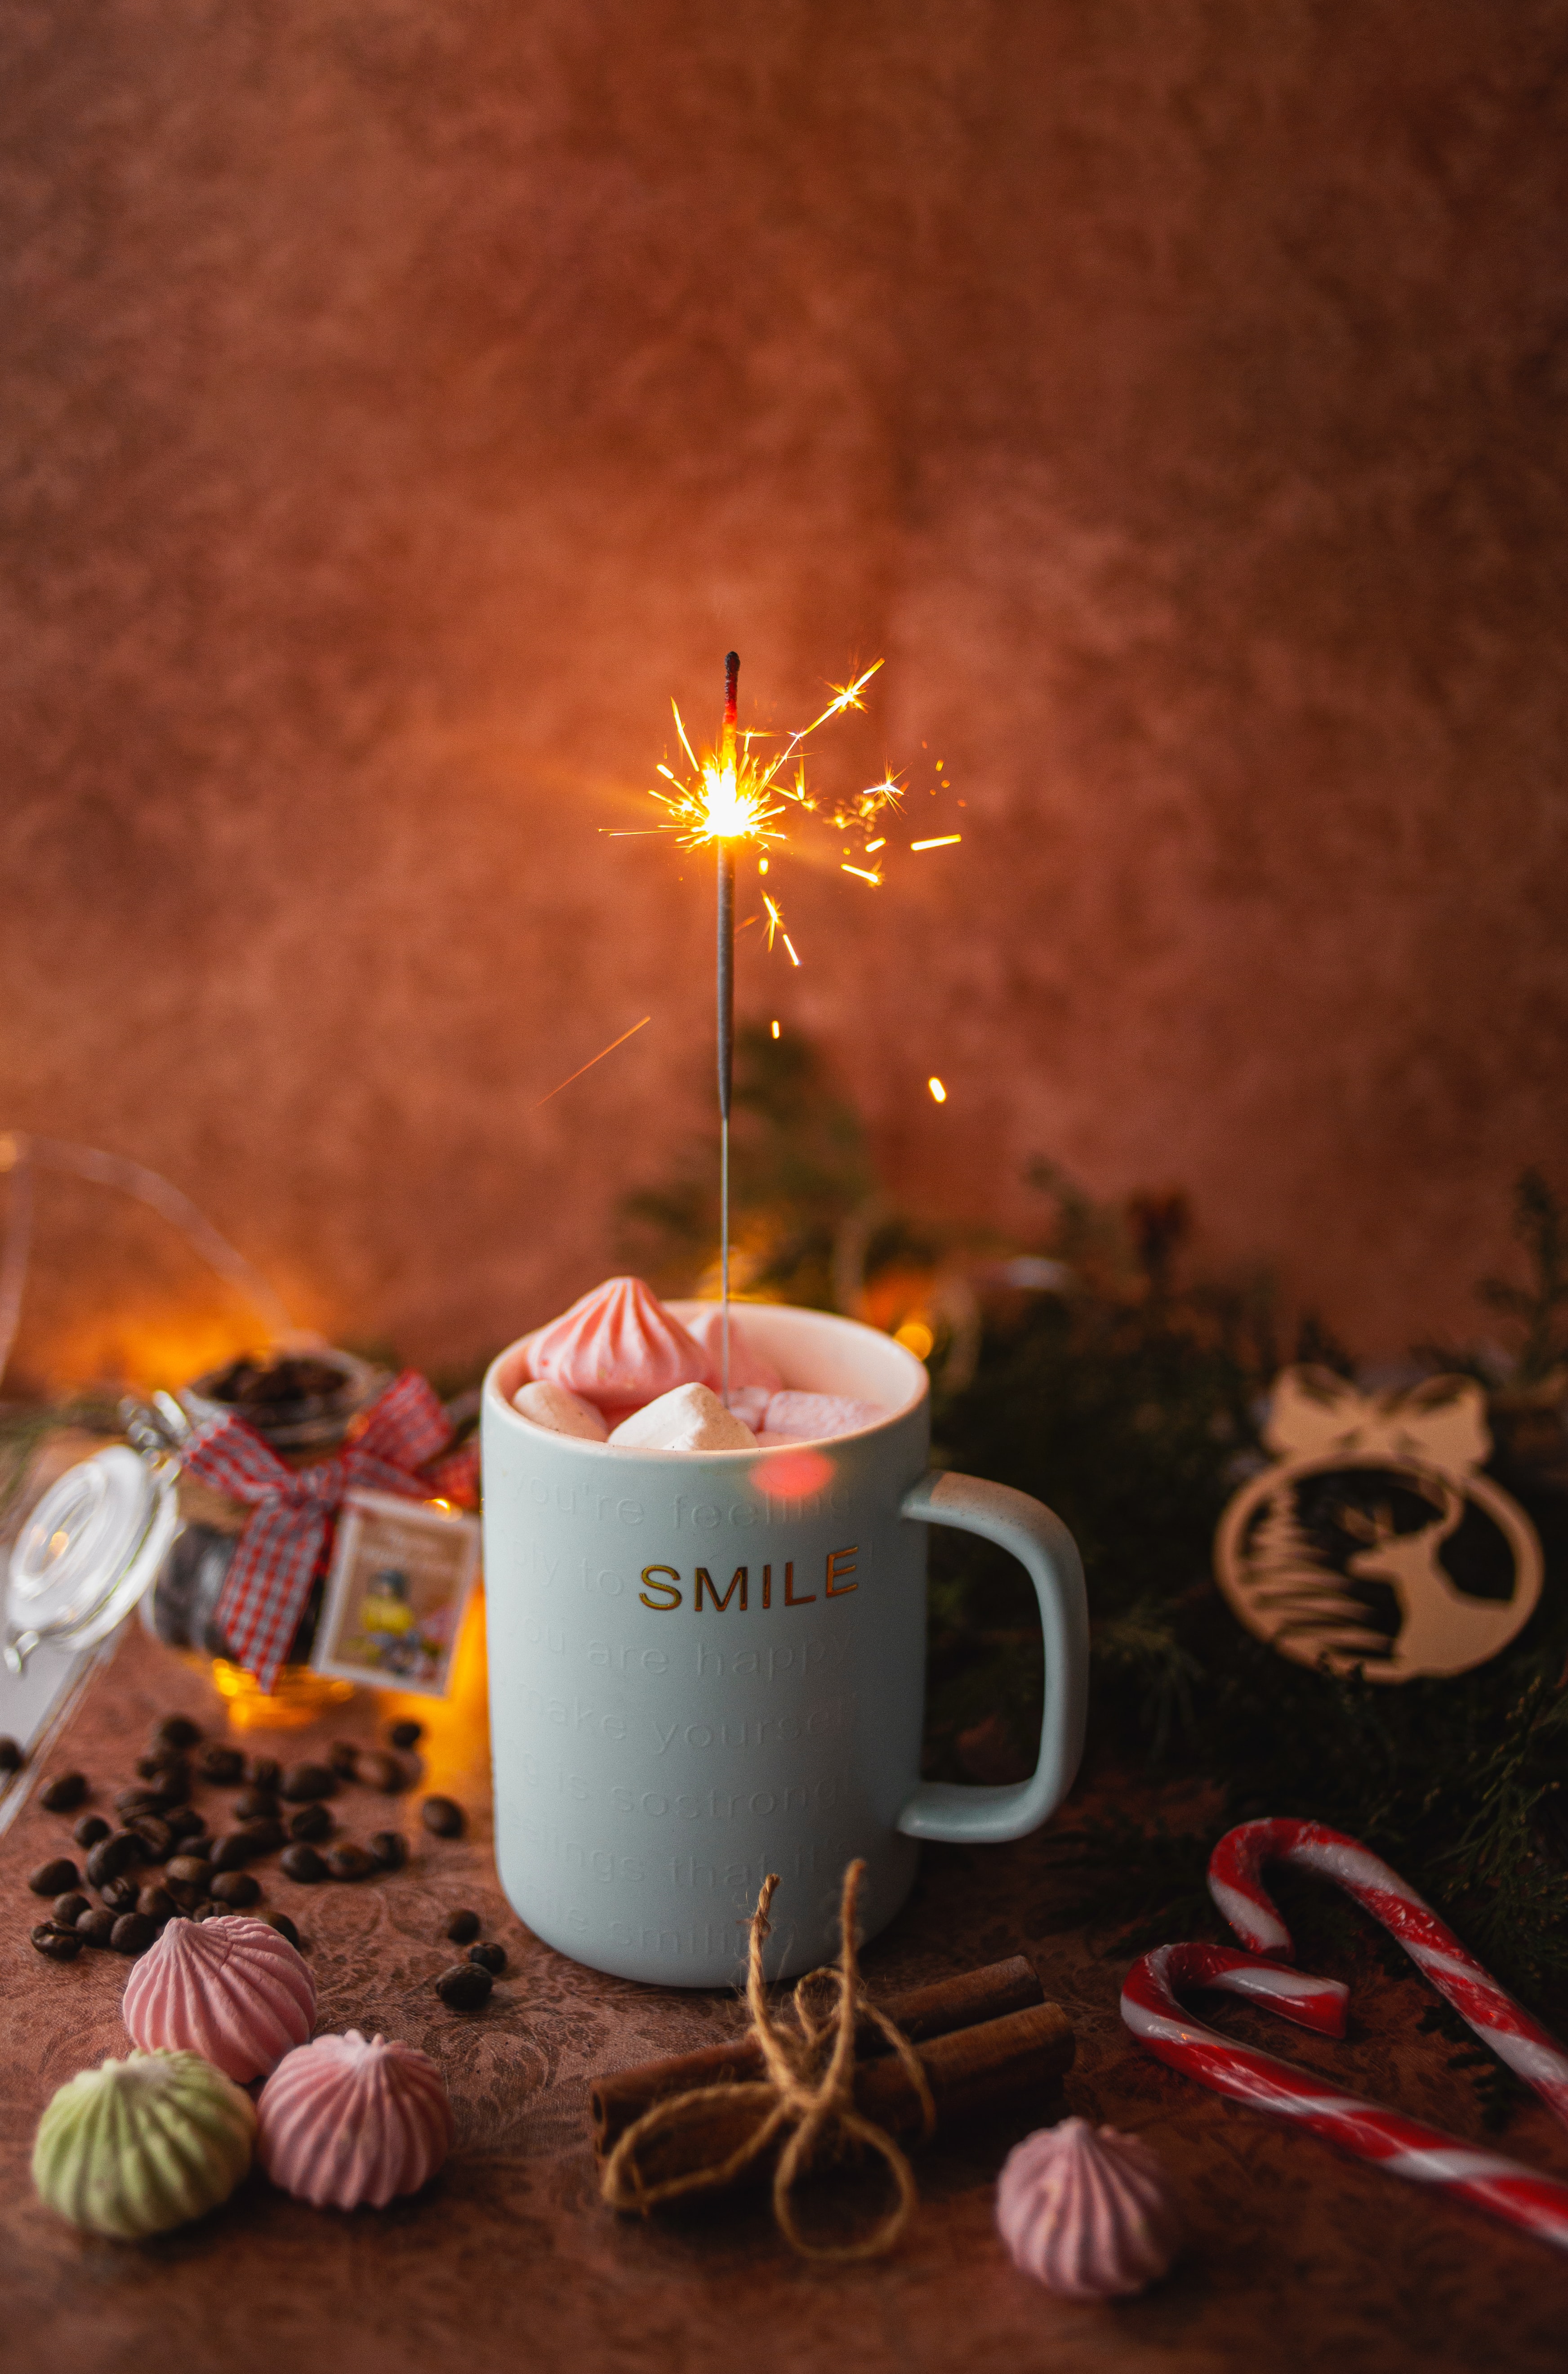 miscellanea, mug, holiday, sparks, cup, miscellaneous, marshmallow, bengal lights, sparklers, zephyr Phone Background